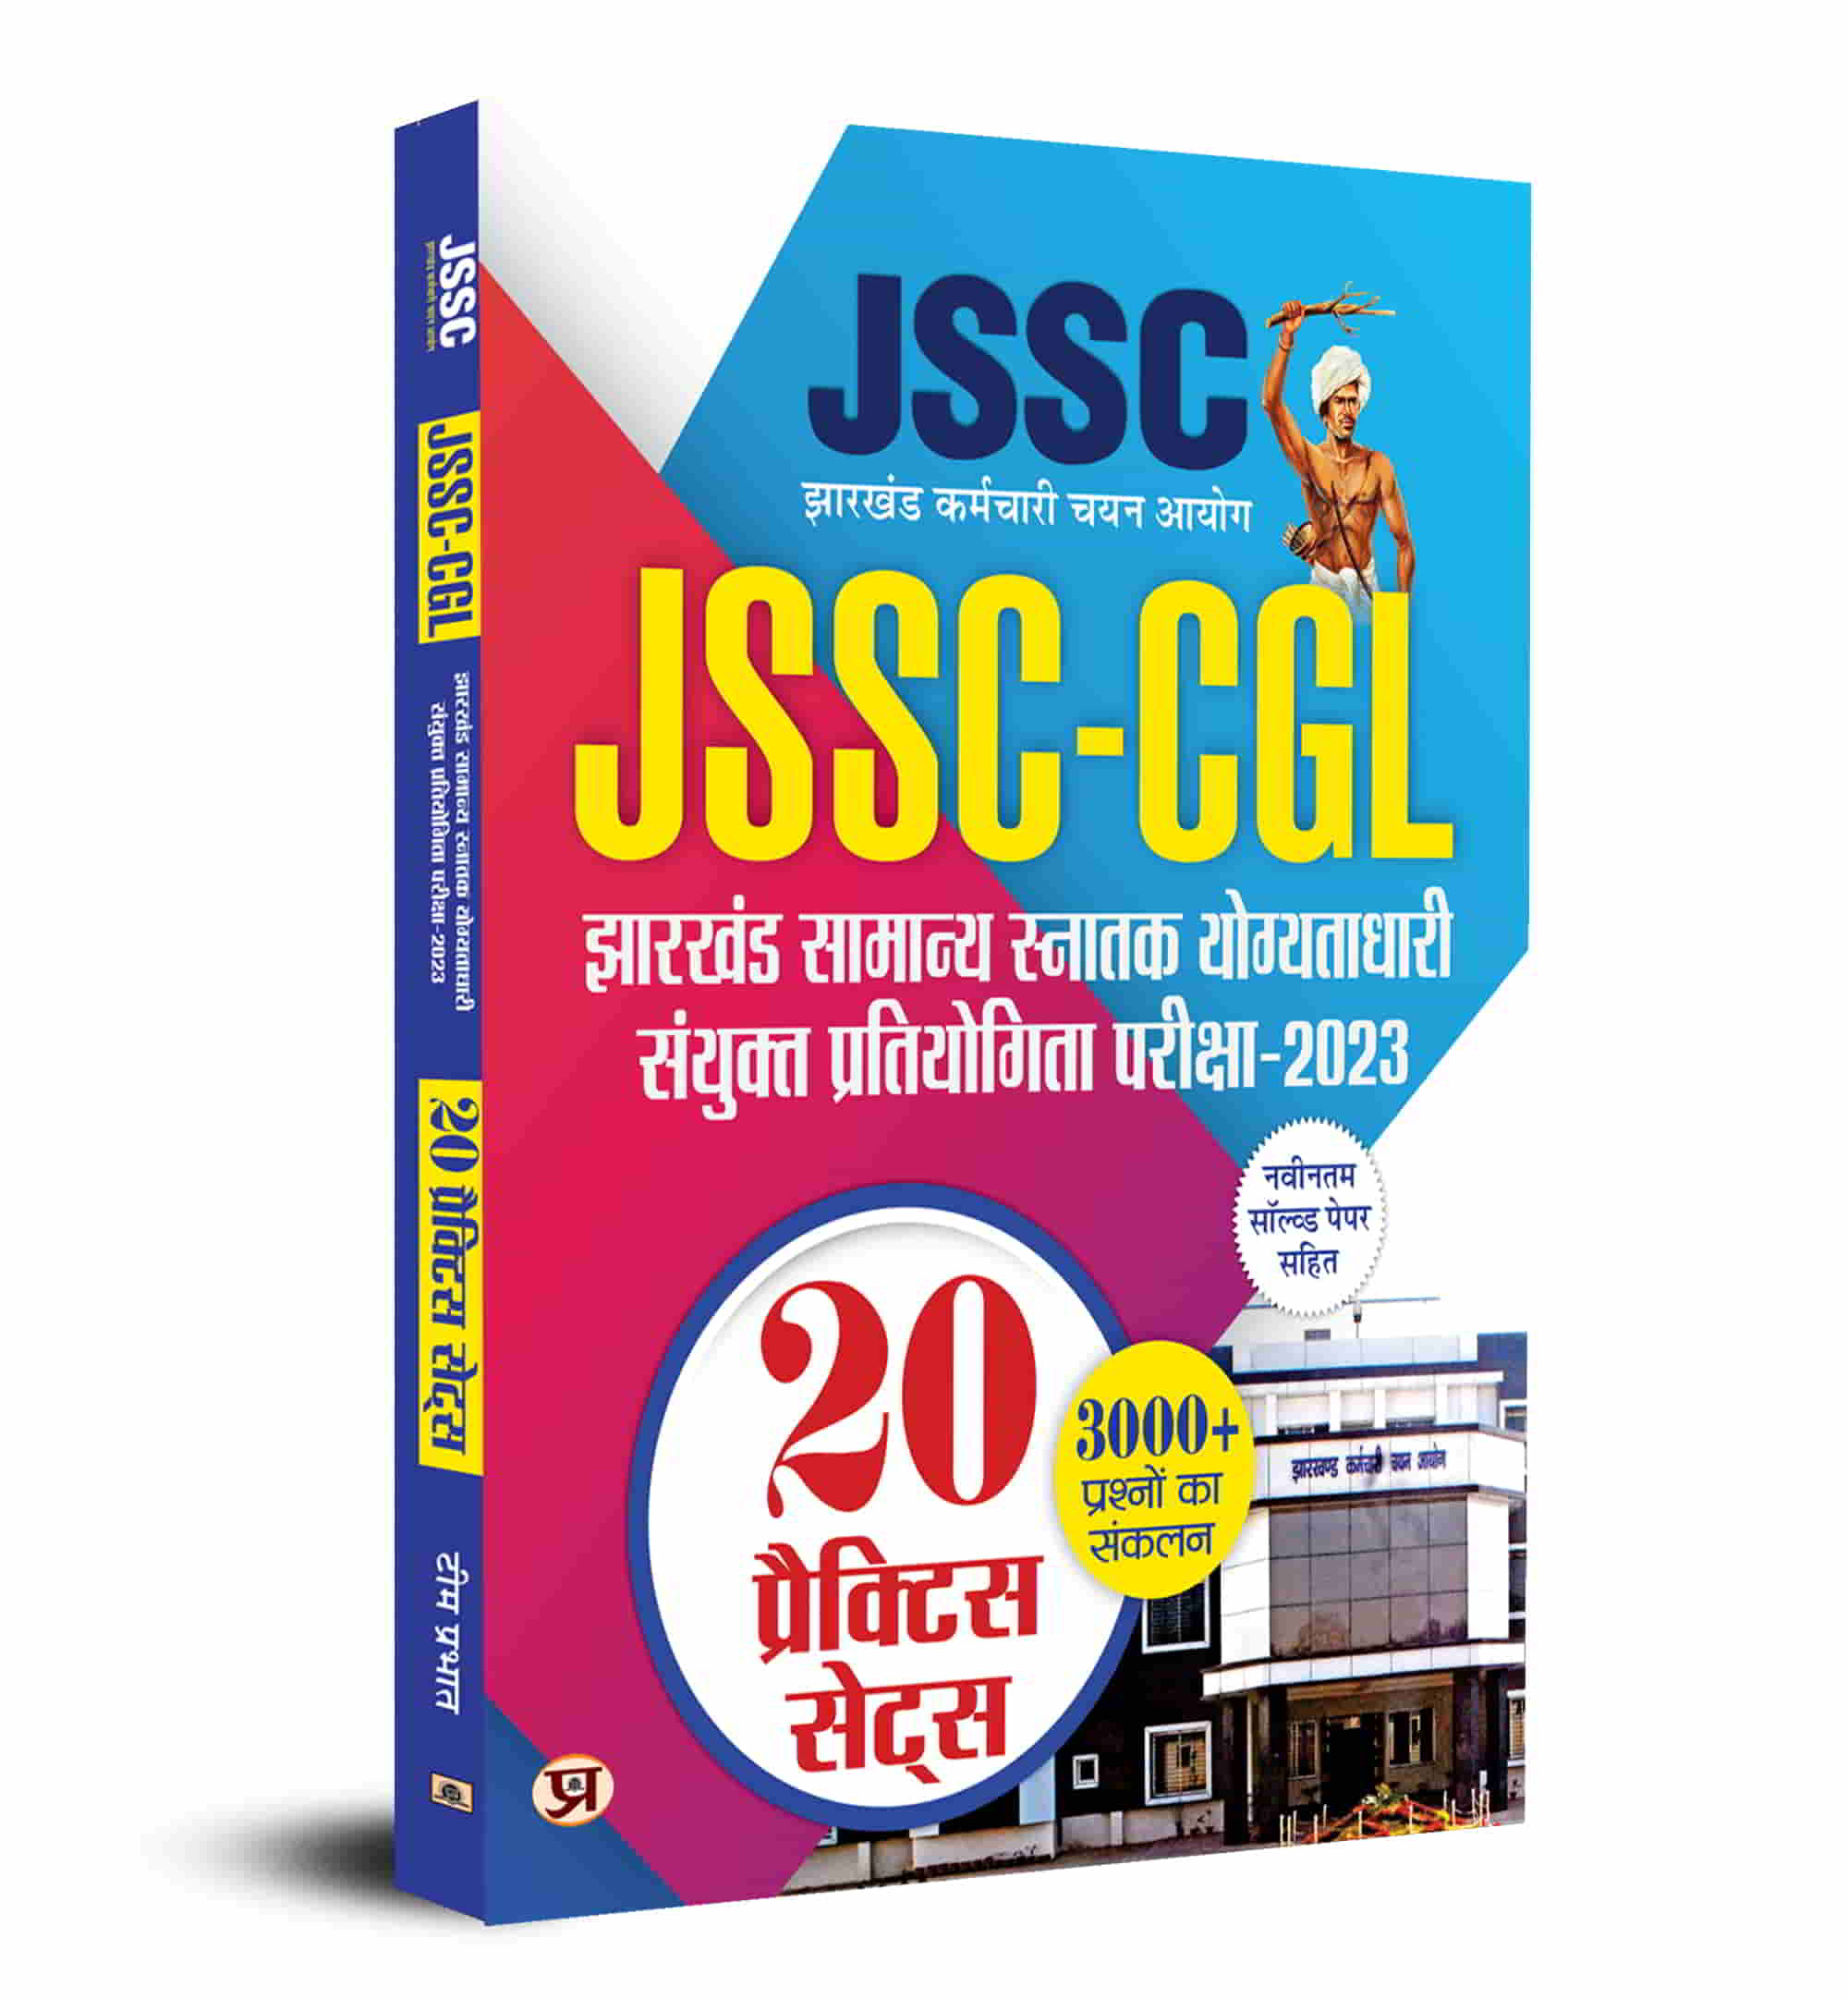 JSSC CGL Jharkhand Staff Selection Commission Book 2023 Solved Papers Paper I and Paper III with 20 Practice Sets Book In Hindi